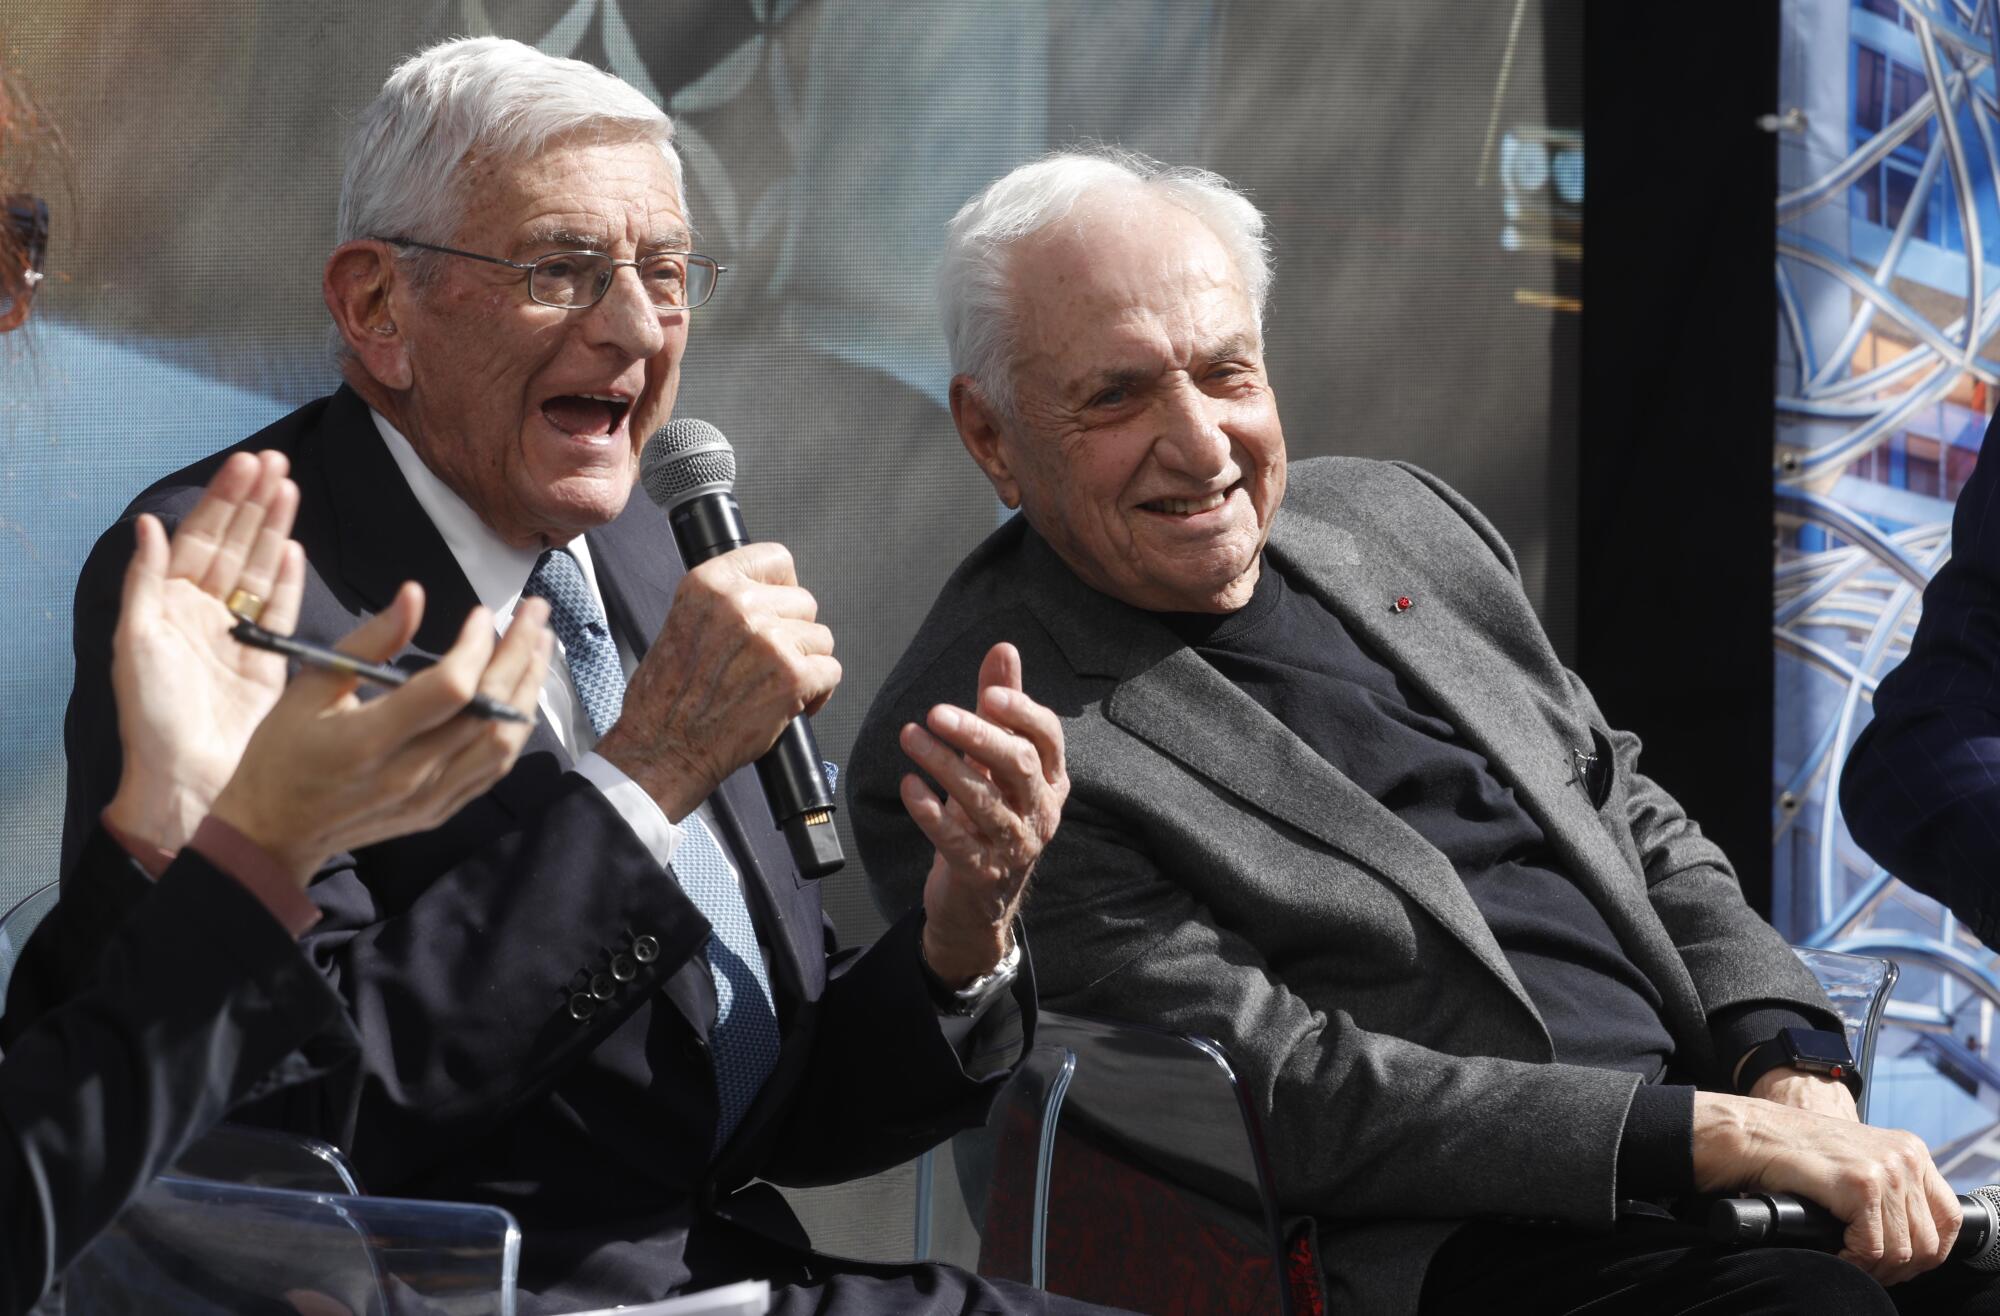 Seated on a stage with Frank Gehry, Eli Broad speaks into a microphone.